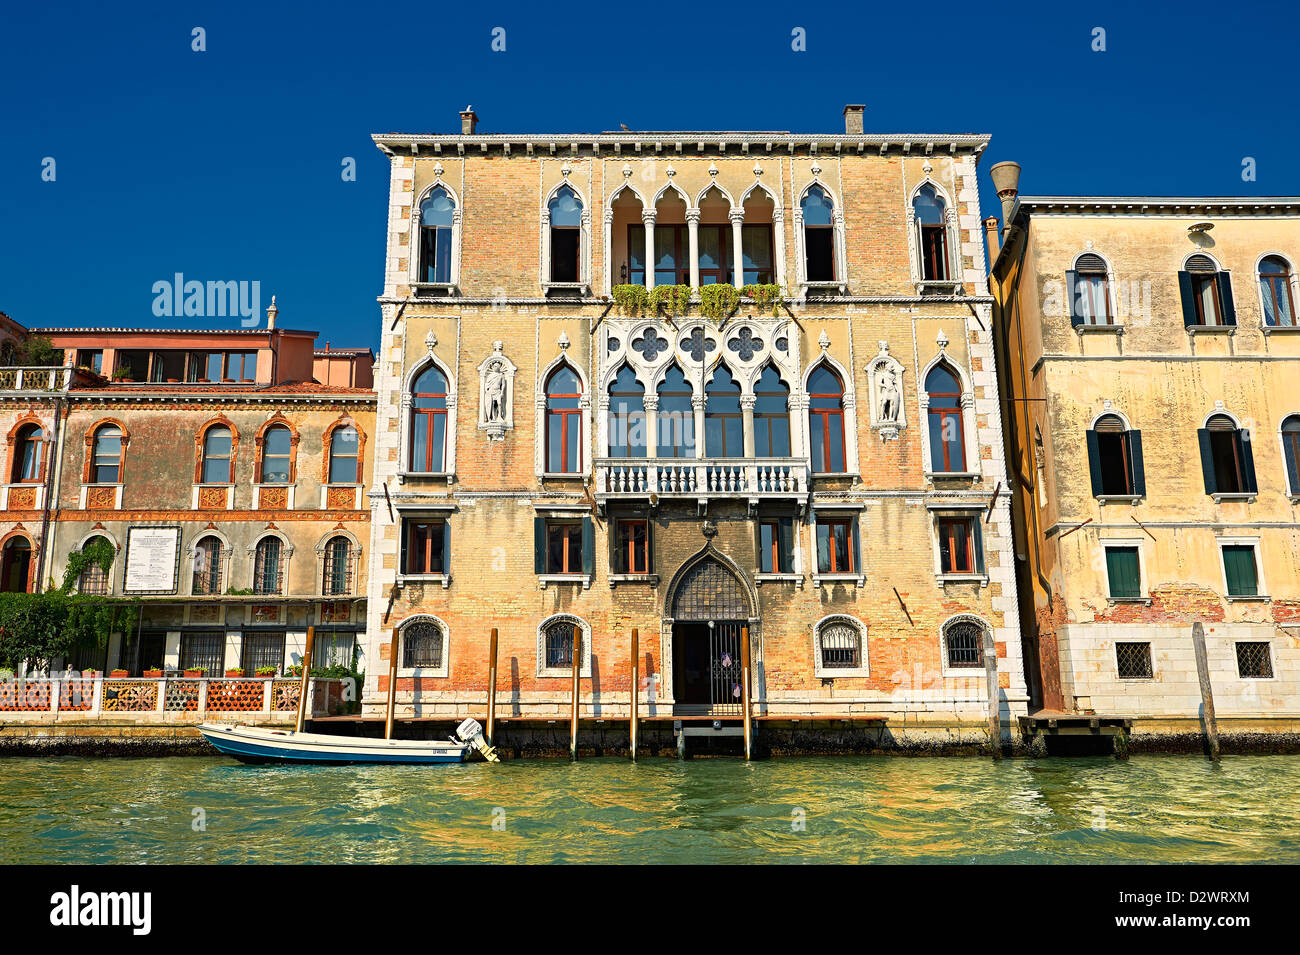 Venetian Gothic Palaces on the Grand Canal Venice Stock Photo